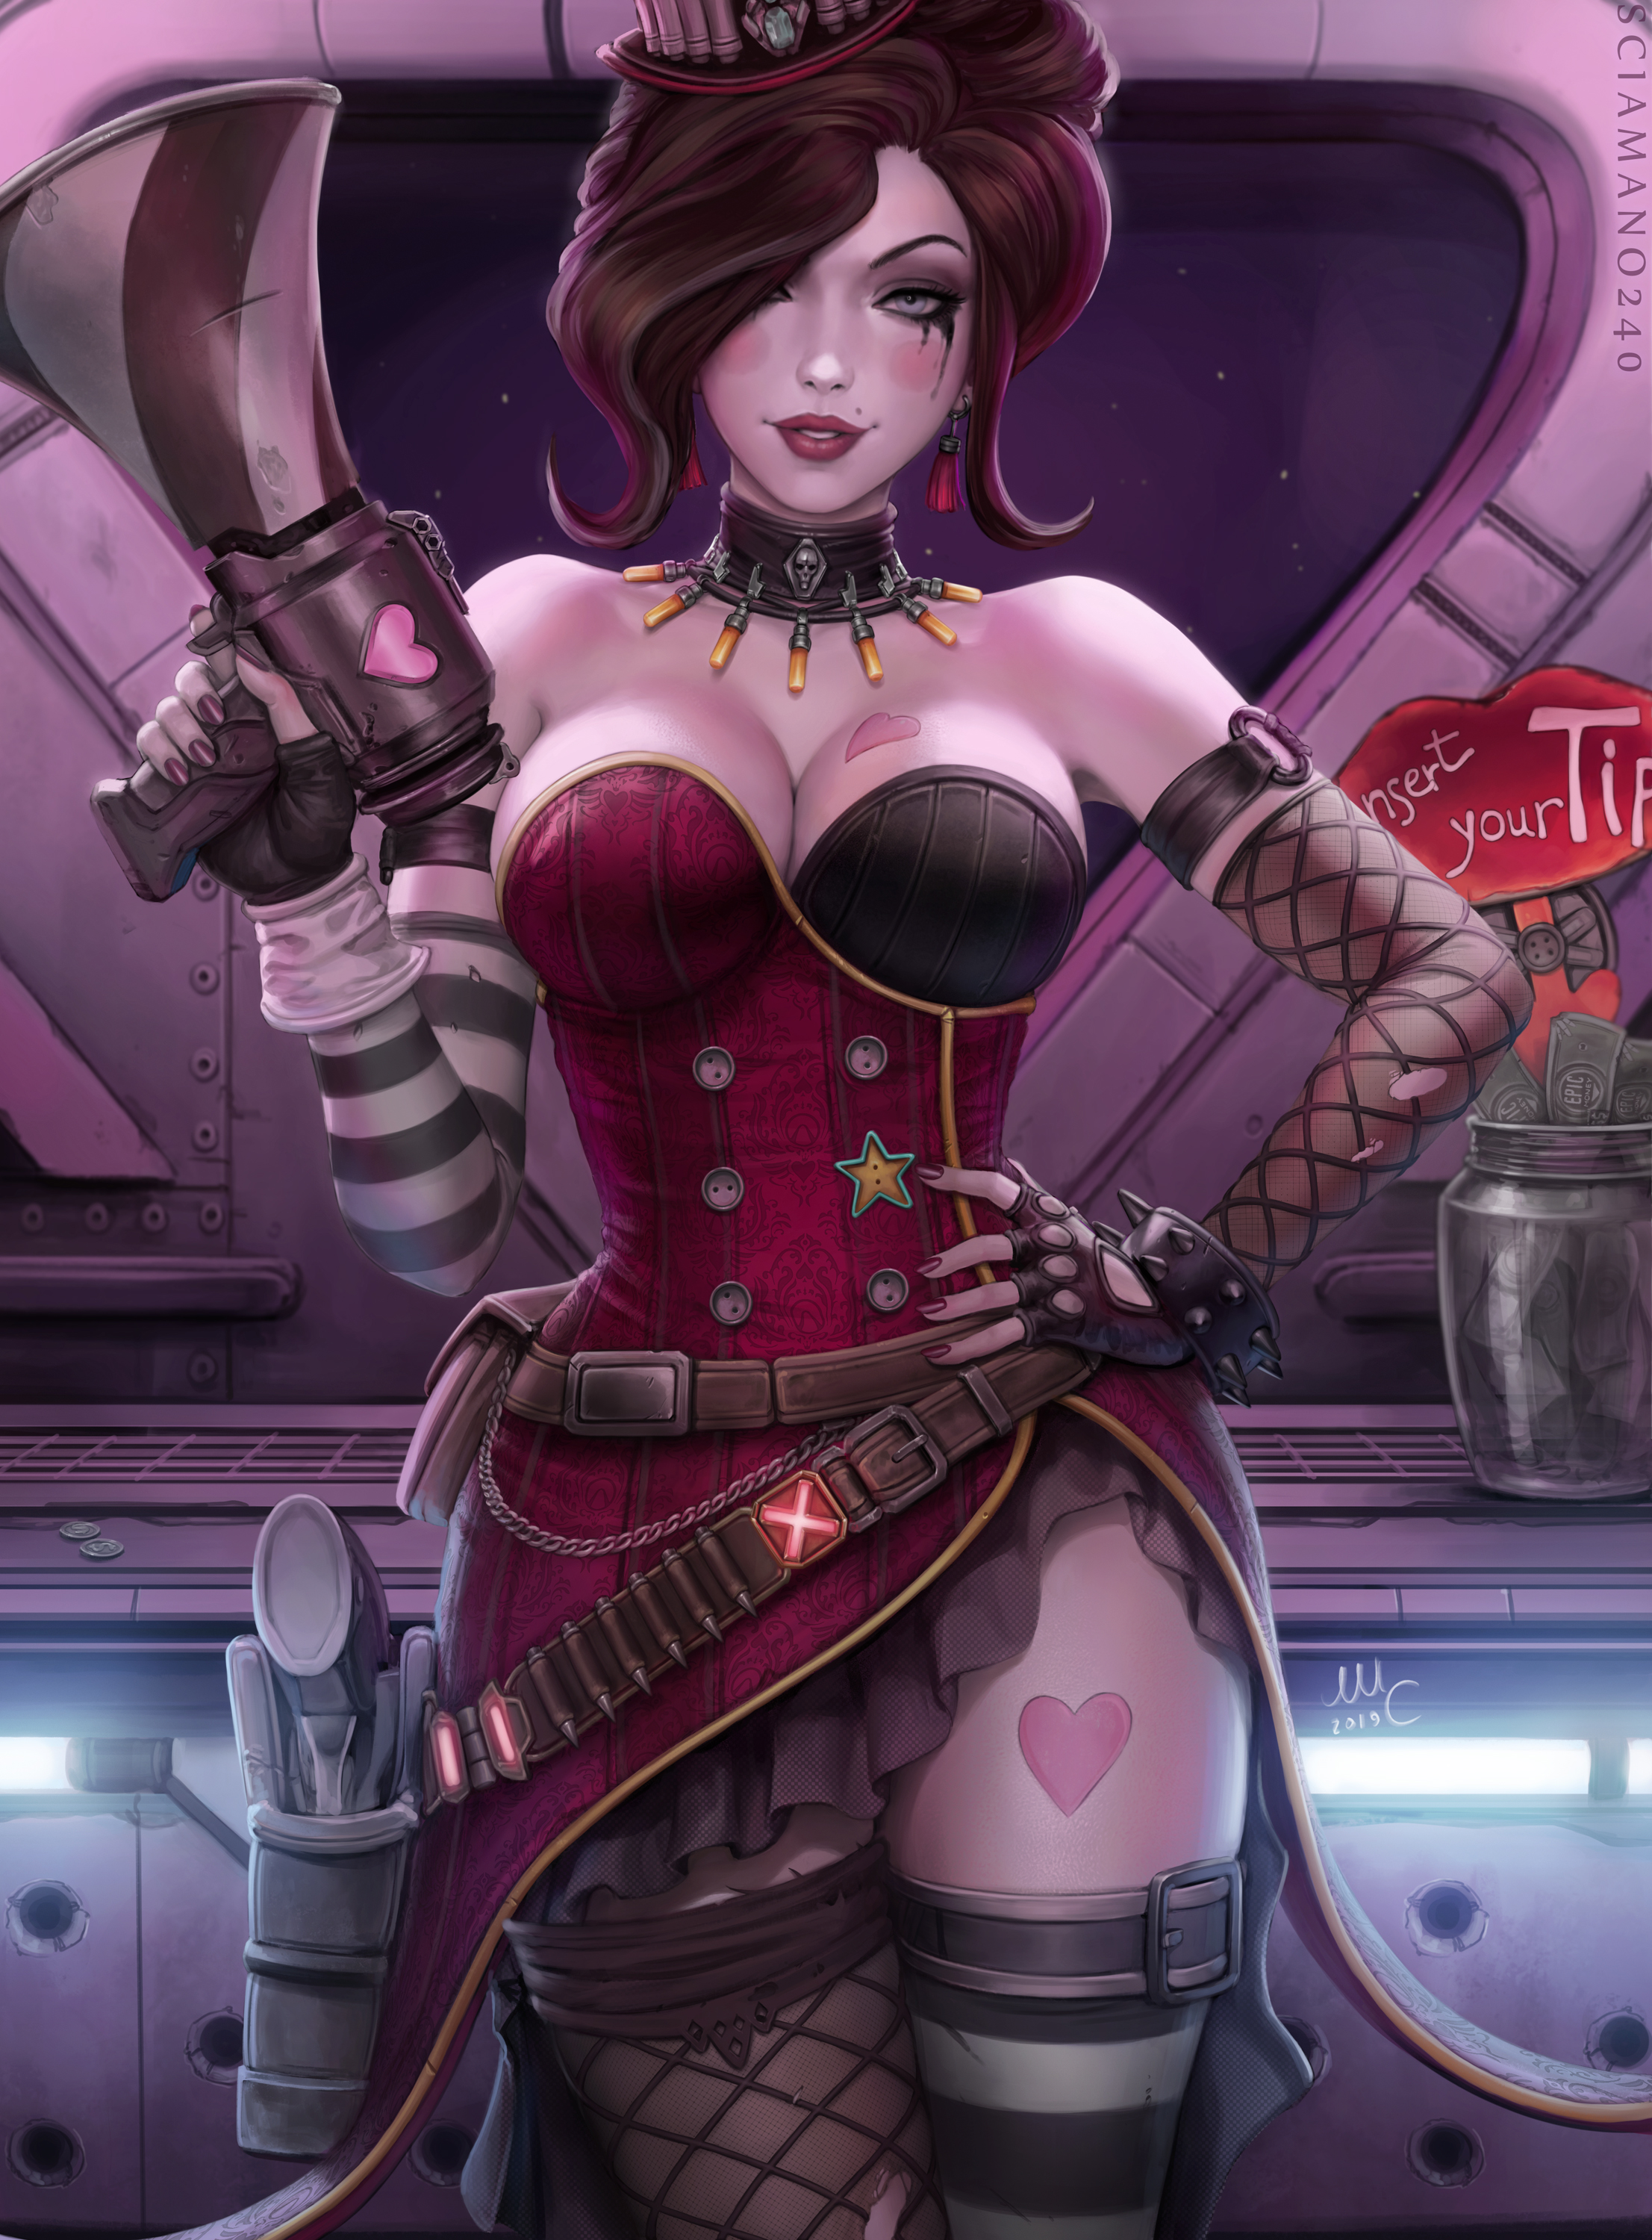 General 2213x3000 Moxxi Mad moxxi Borderlands Borderlands 2 video games video game characters women with hats red lipstick vertical collar makeup tattoo stockings thigh-highs fishnet stockings belt gun weapon bullet megaphones artwork drawing illustration digital art fan art Mirco Cabbia